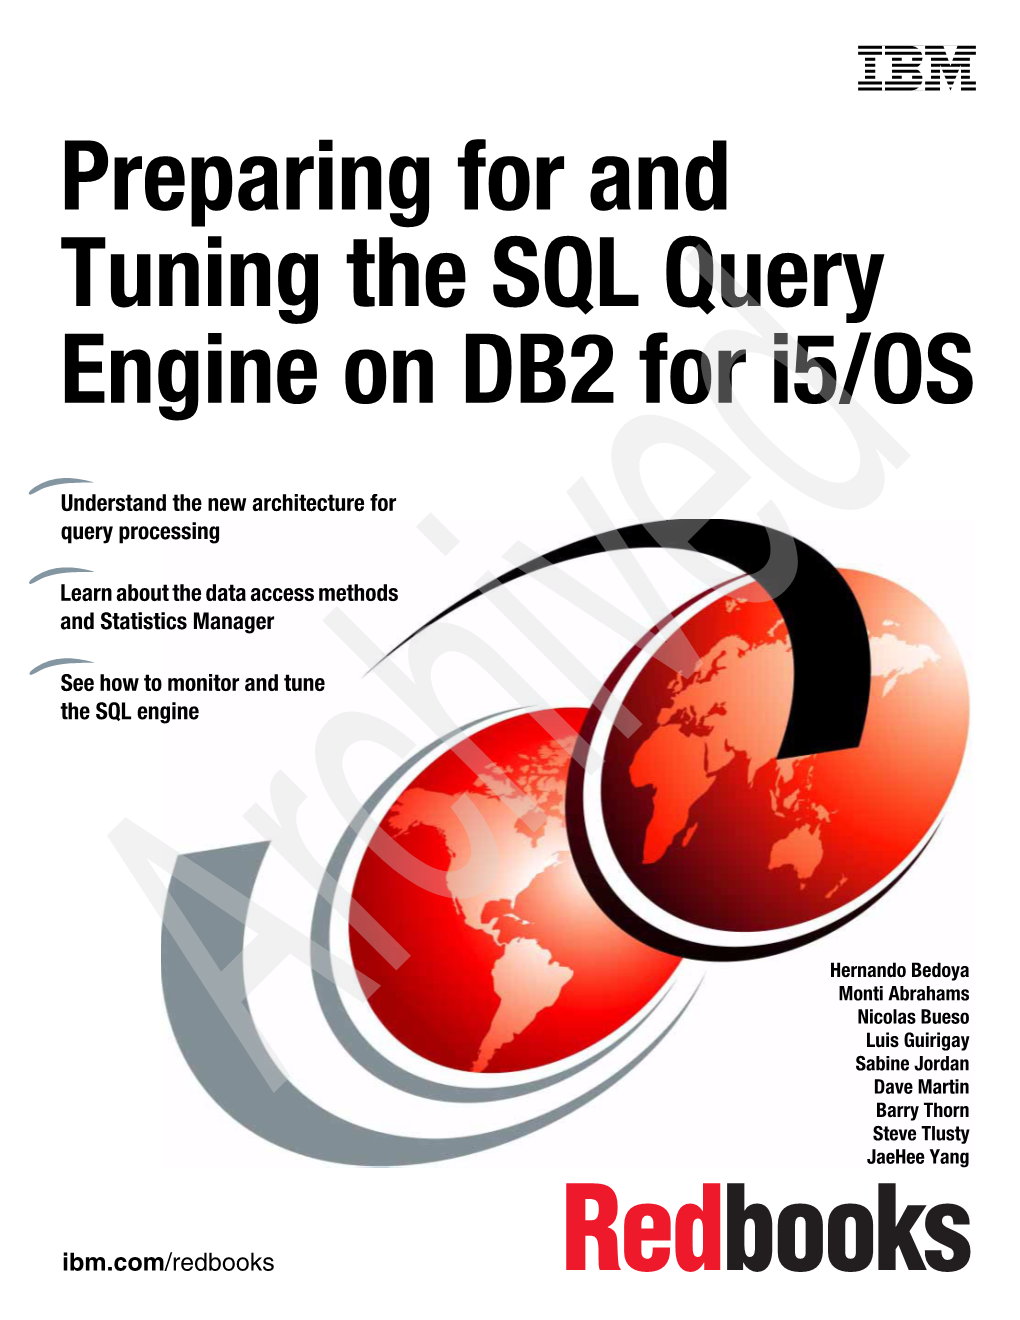 Preparing for and Tuning the SQL Query Engine on DB2 for I5/OS